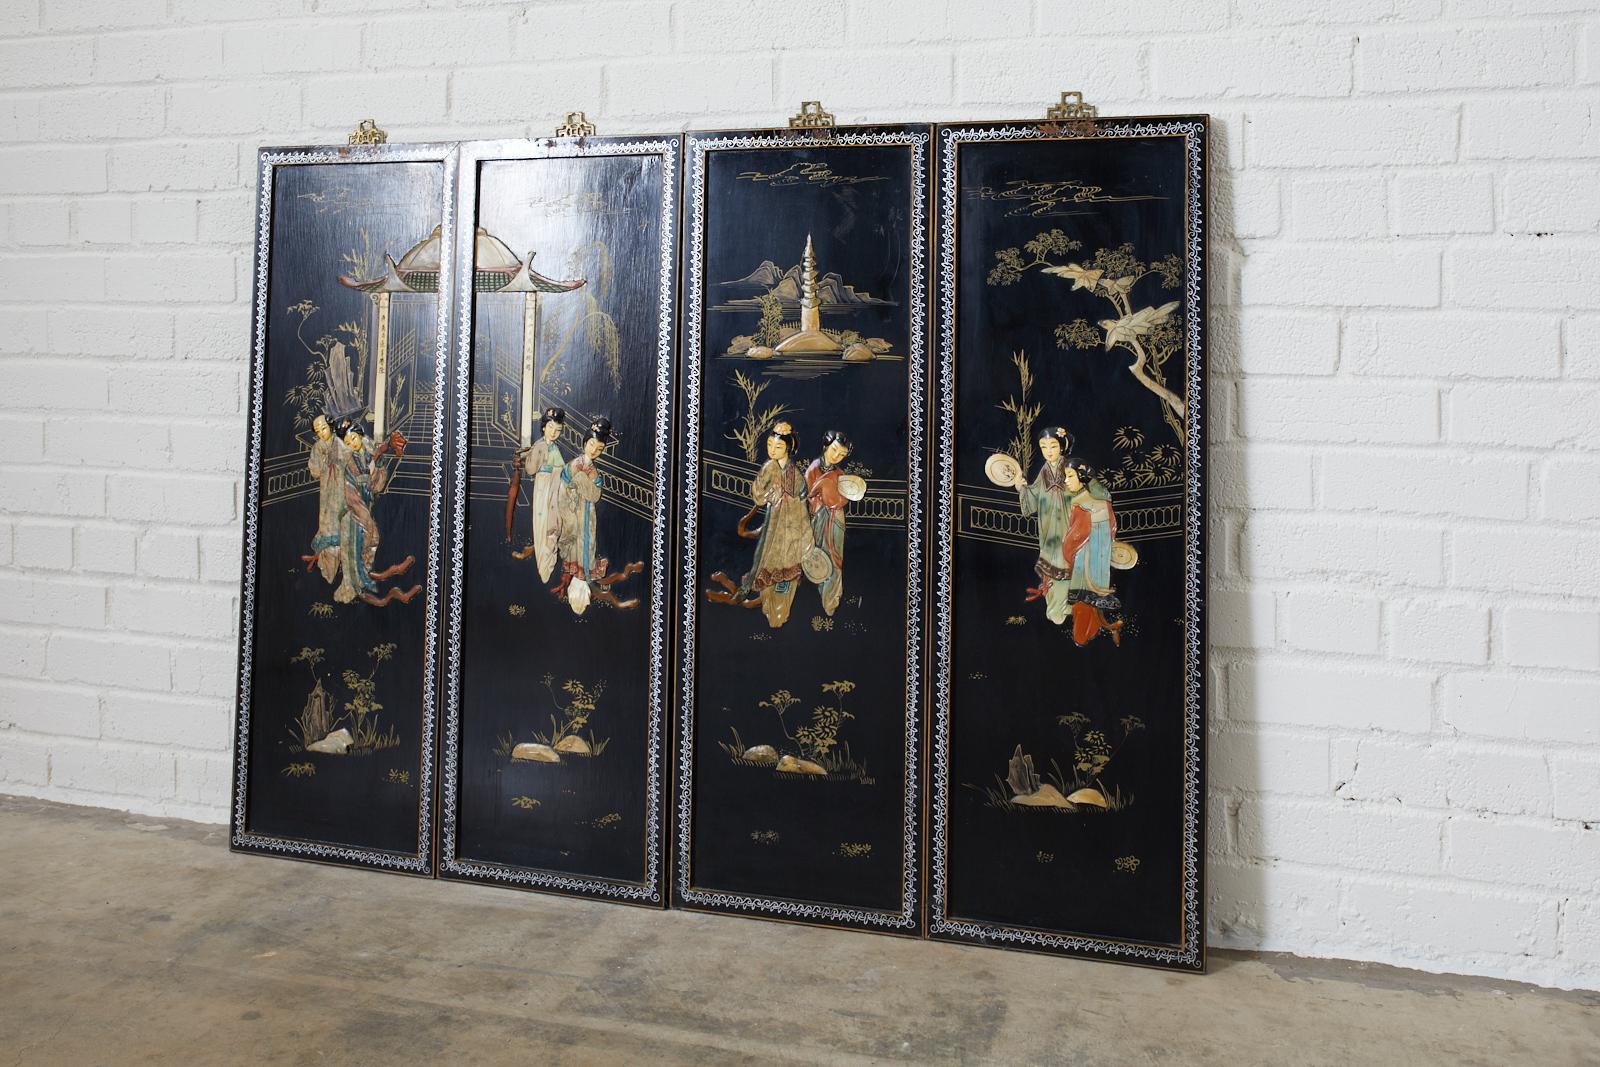 Set of 4 Chinese black lacquer coromandel style panels featuring colorful hardstone decoration. Each depicting 2 beauties in the garden with pagodas and foliate finished gilt. Each wood panel is suspended from a brass metal hanger mount with an open